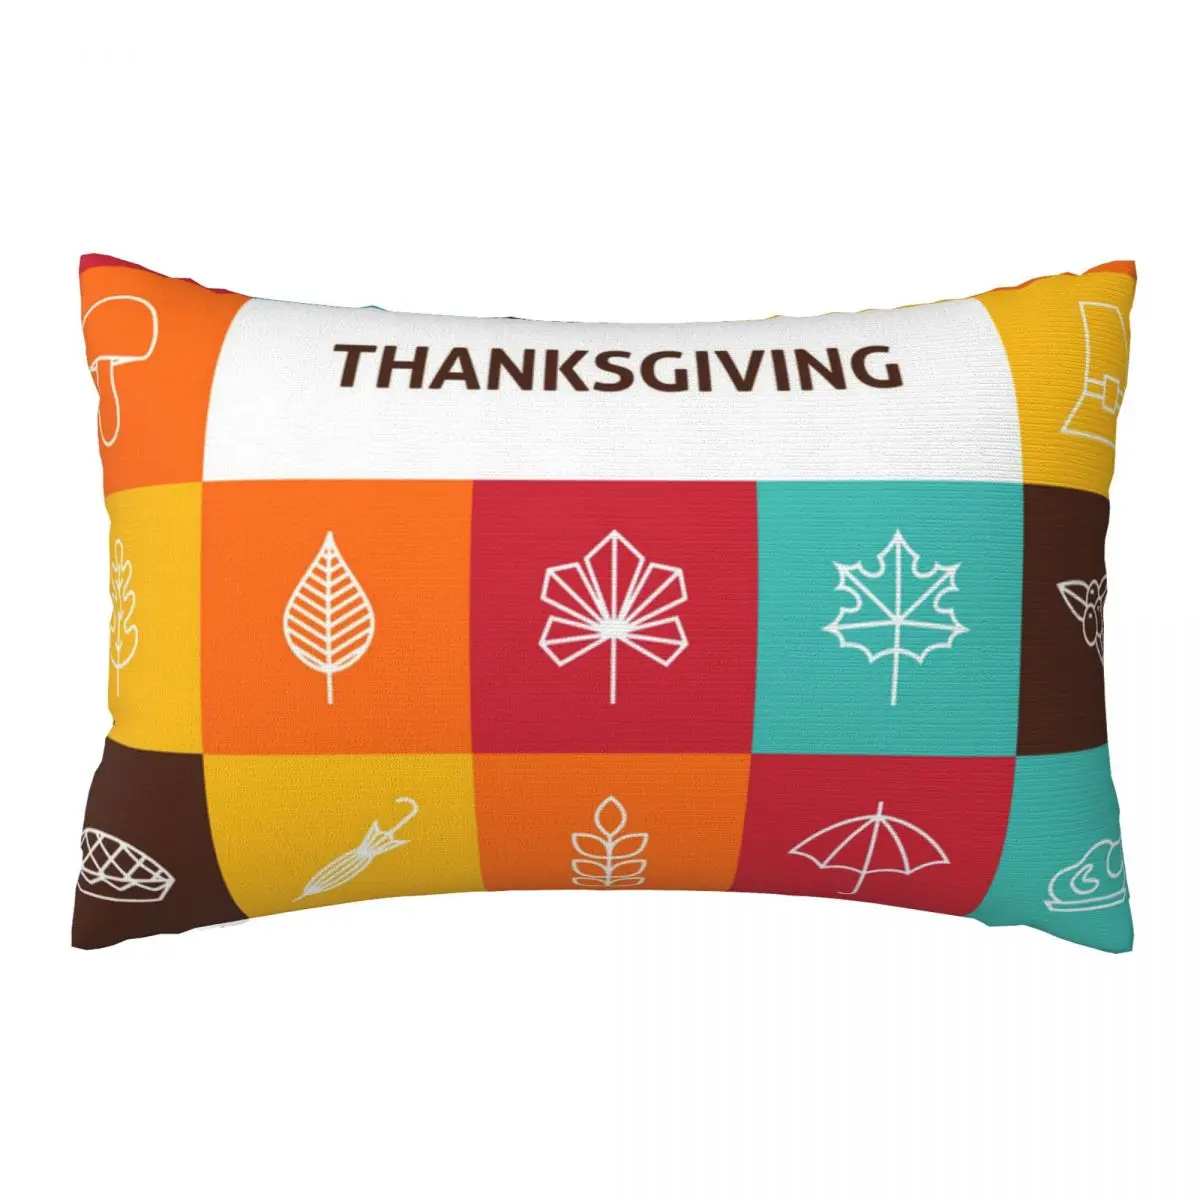 

Art Thanksgiving Day Holiday Decorative Pillow Covers Throw Pillow Cover Home Pillows Shells Cushion Cover Zippered Pillowcase